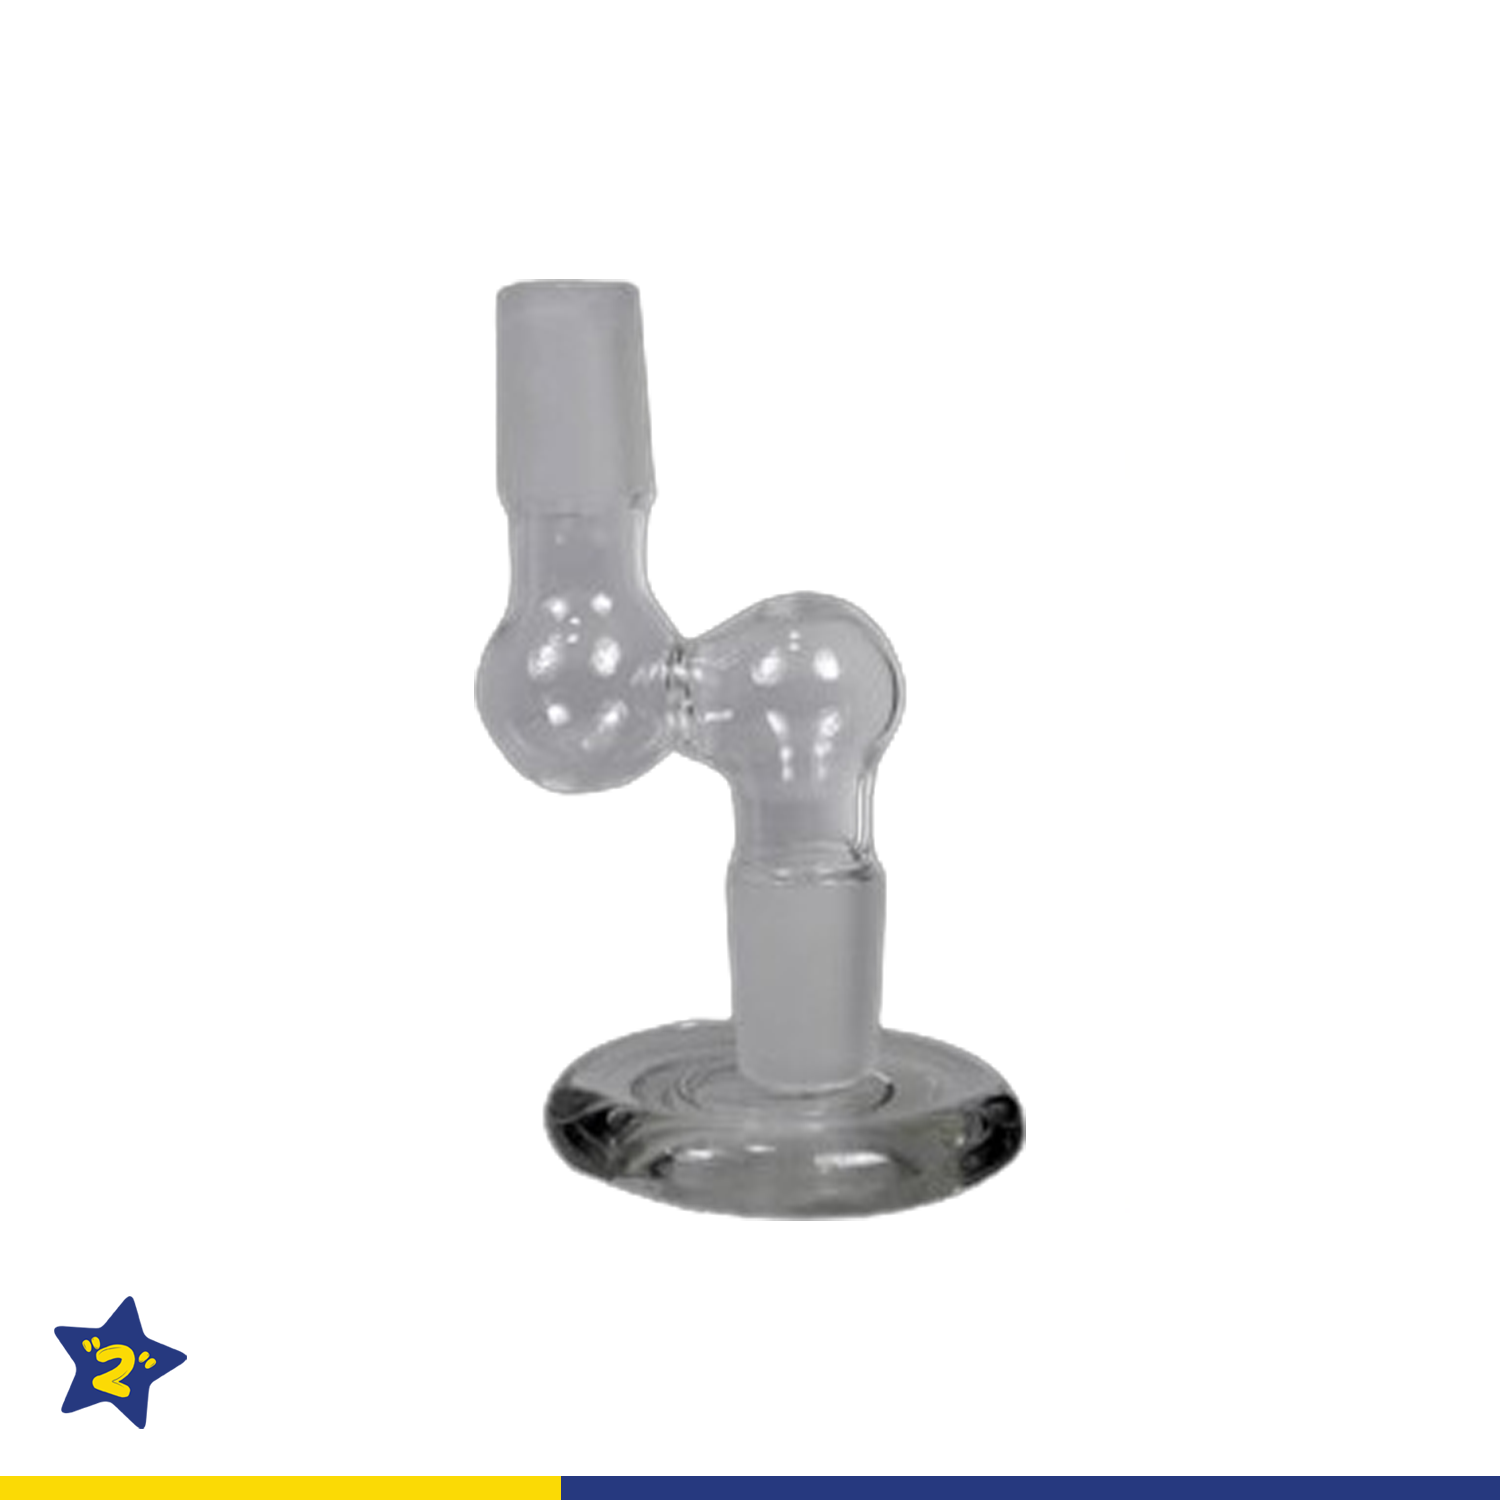 18mm Male To 18mm Male 90° Glass Adapter